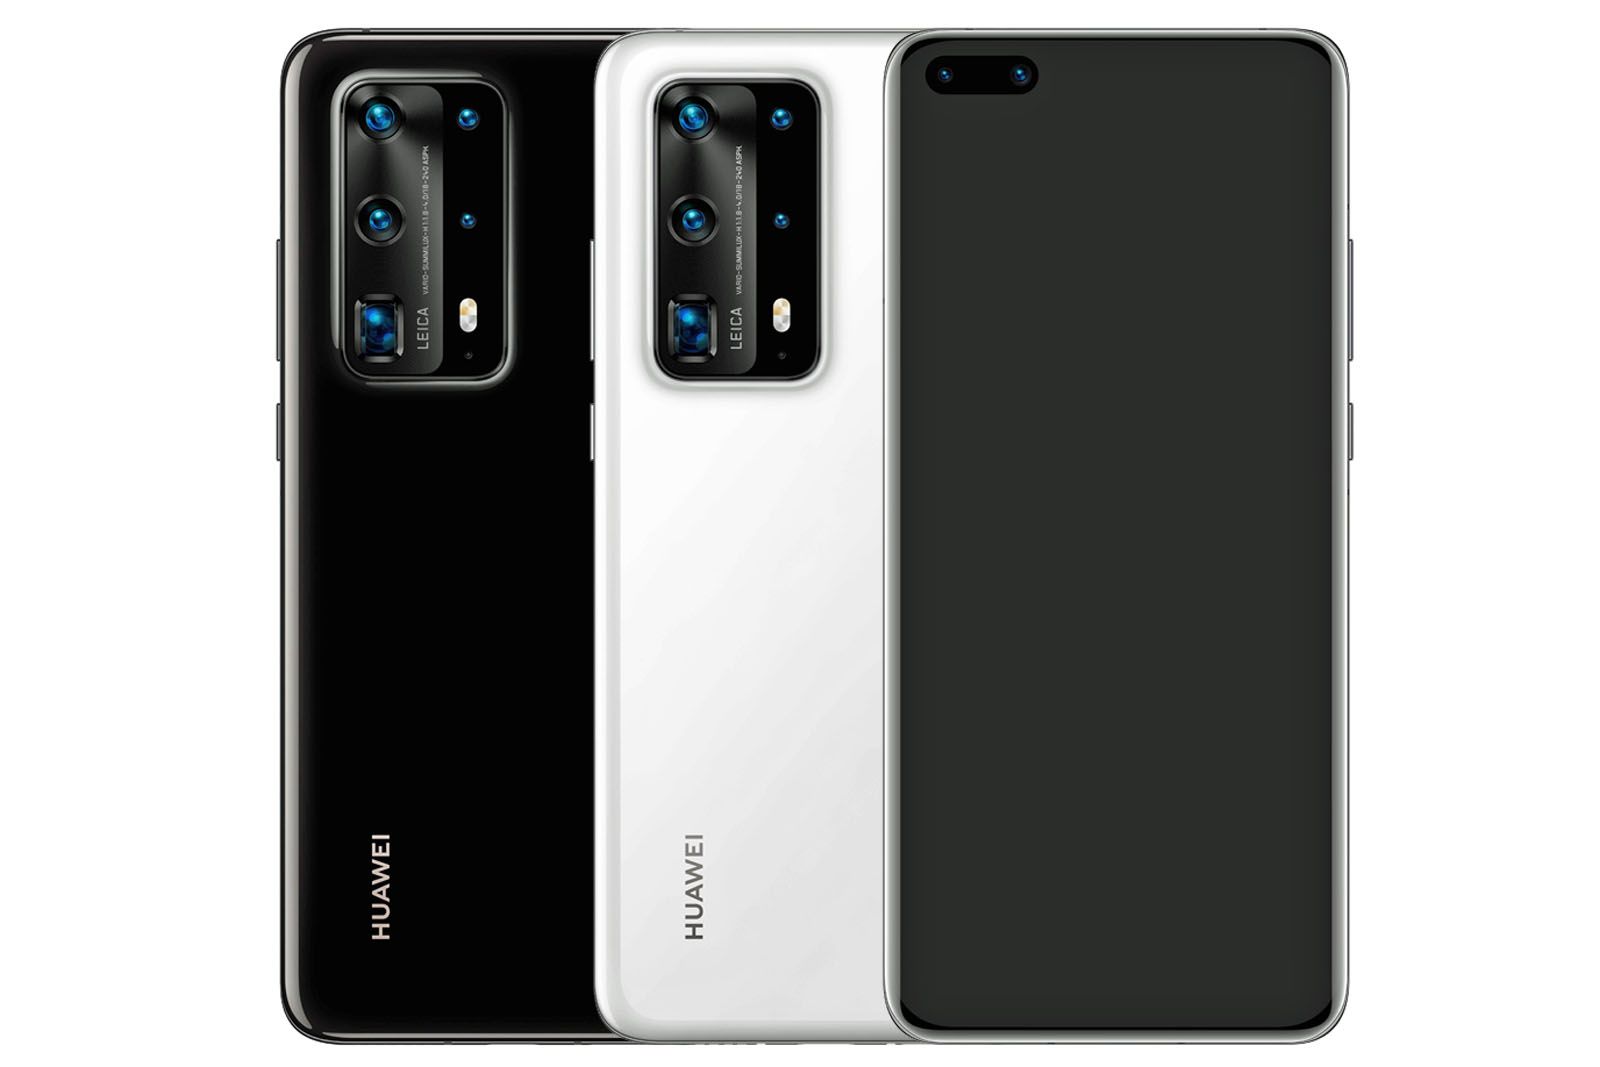 Worlds most powerful 5G flagship smartphone - Huawei P40 - to launch on 26 March image 1